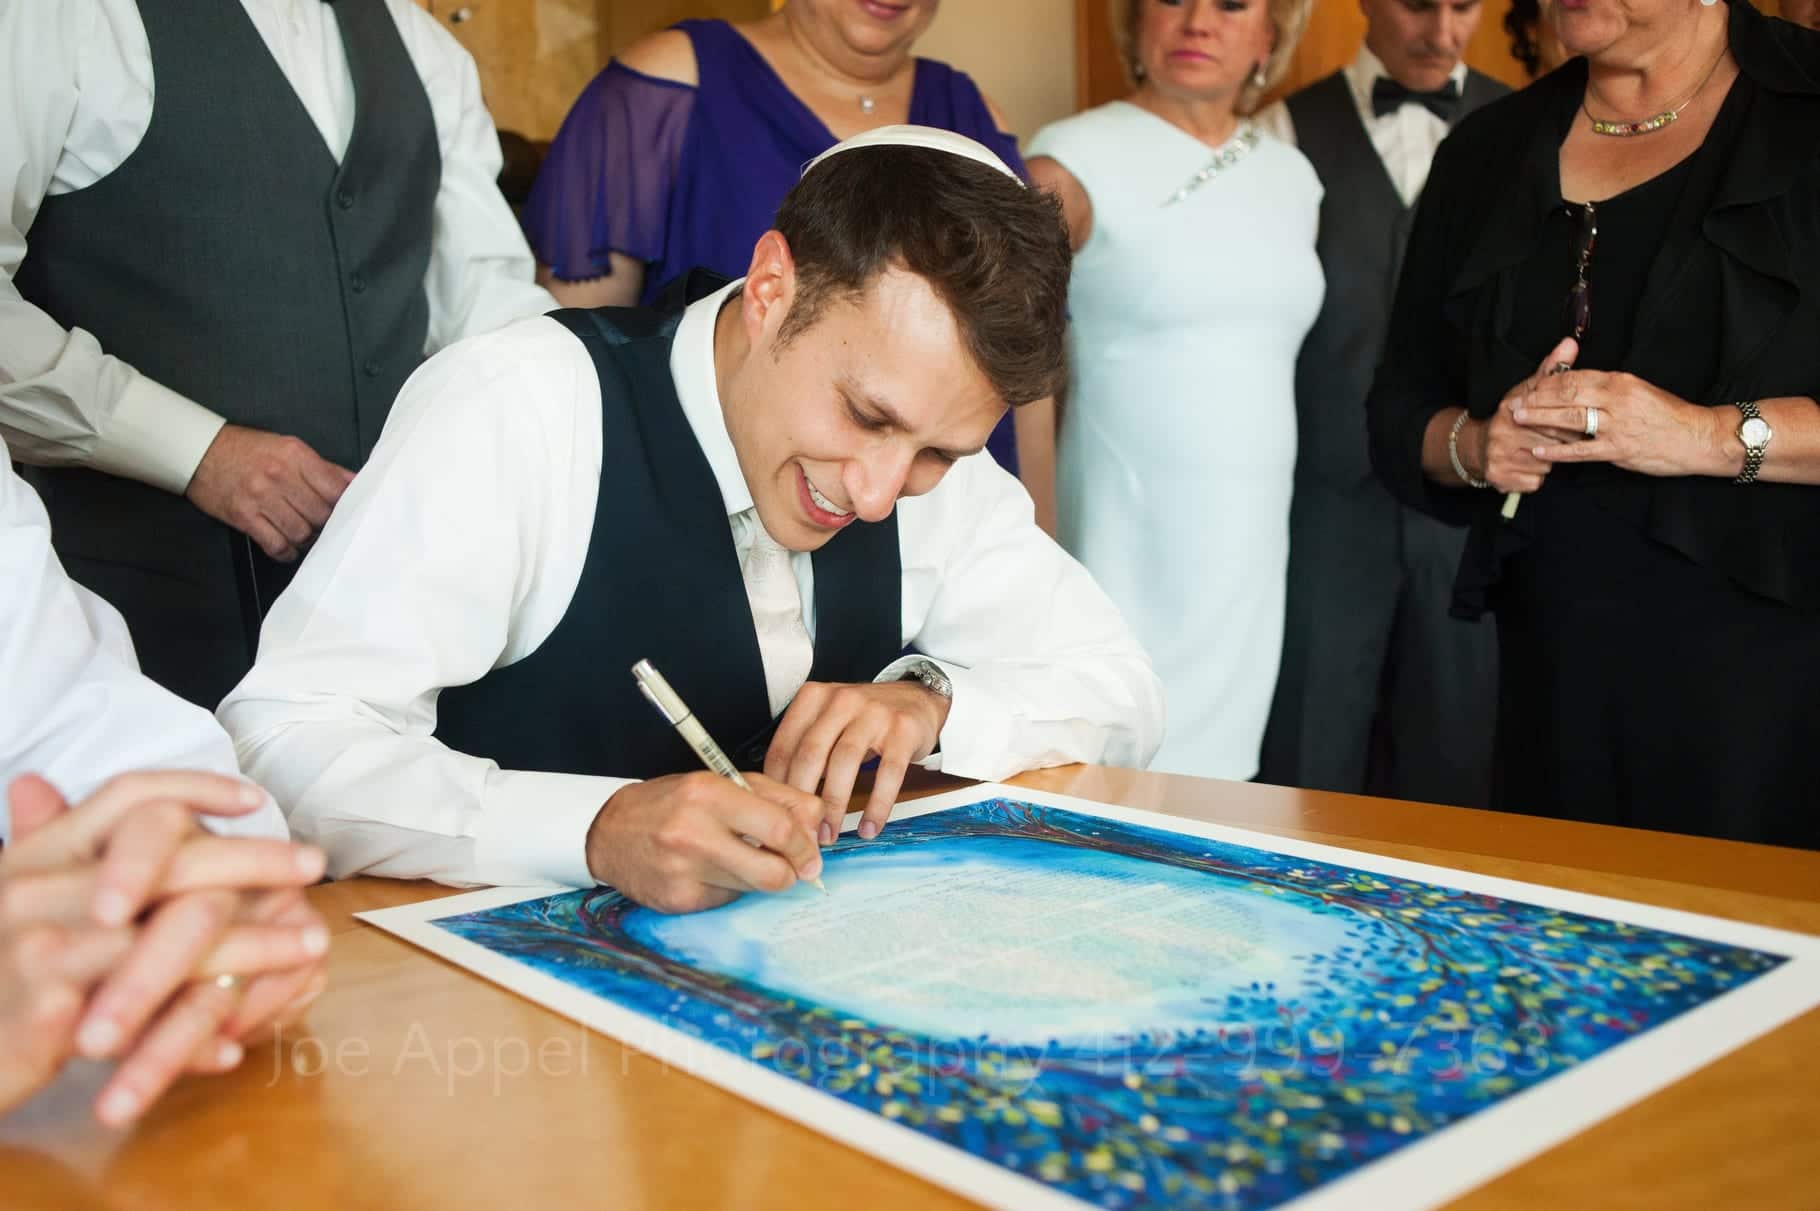 A groom signs a blue ketubah on a brown table as family members gather around to witness.